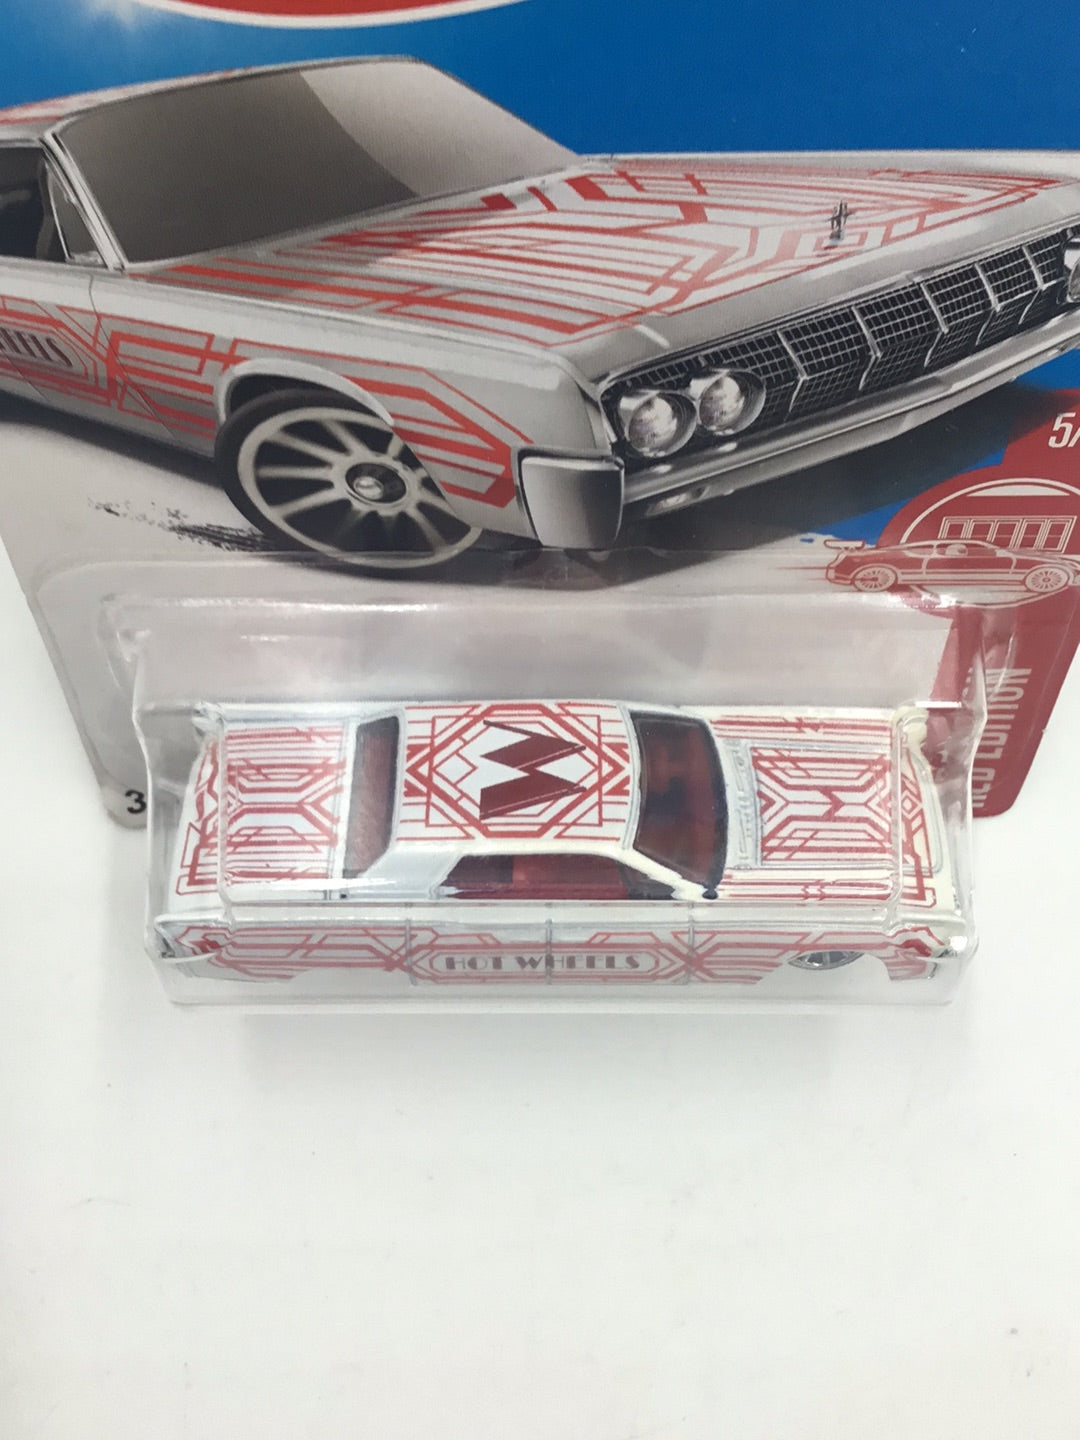 2017 hot wheels red edition 1964 Lincoln Continental #5 EE1